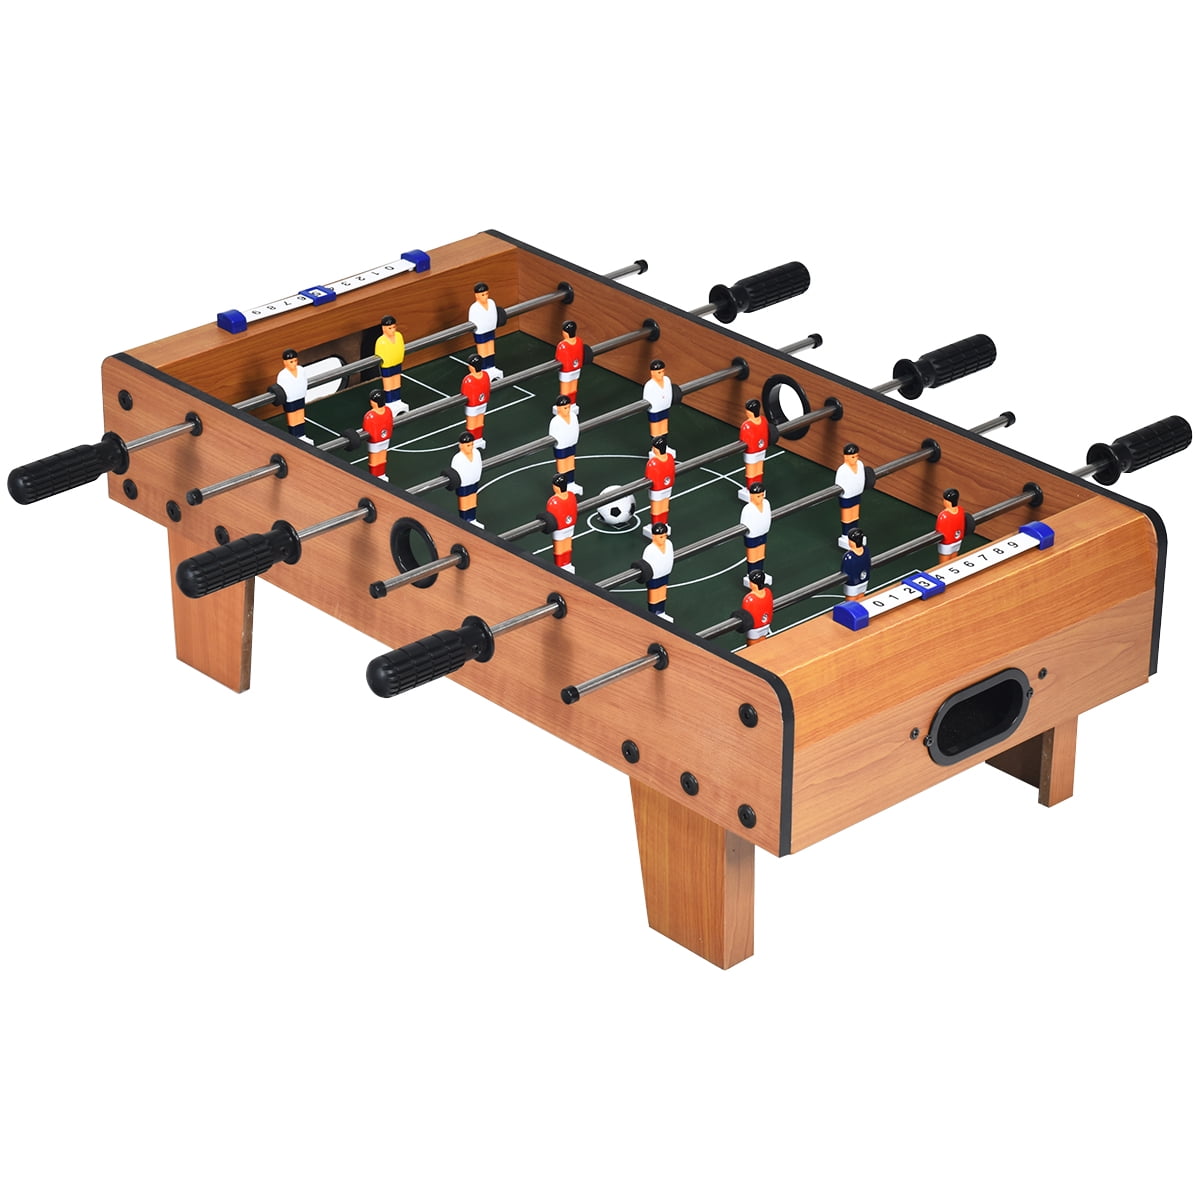 15 x 3 Portable Football Machine Game Gaming Room Supplies Sports Games Gift for Kids Toddler Children Soccer Game for Kids Foosball Table Mini Tabletop Football 